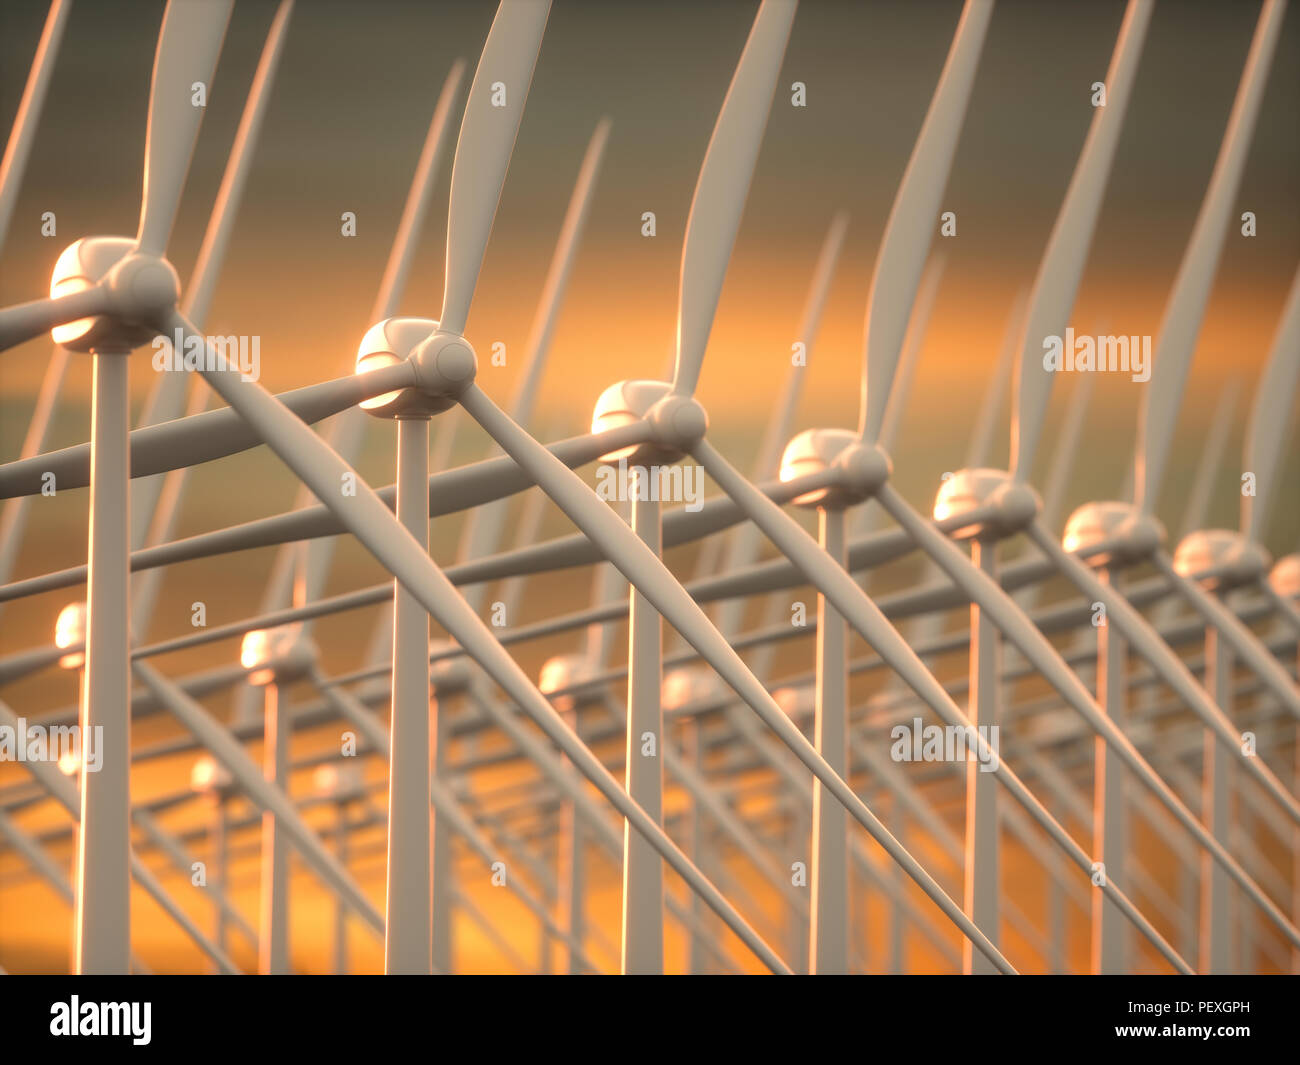 3D illustration of wind farms in wind power generation. Mechanical energy being transformed into electrical energy. Stock Photo